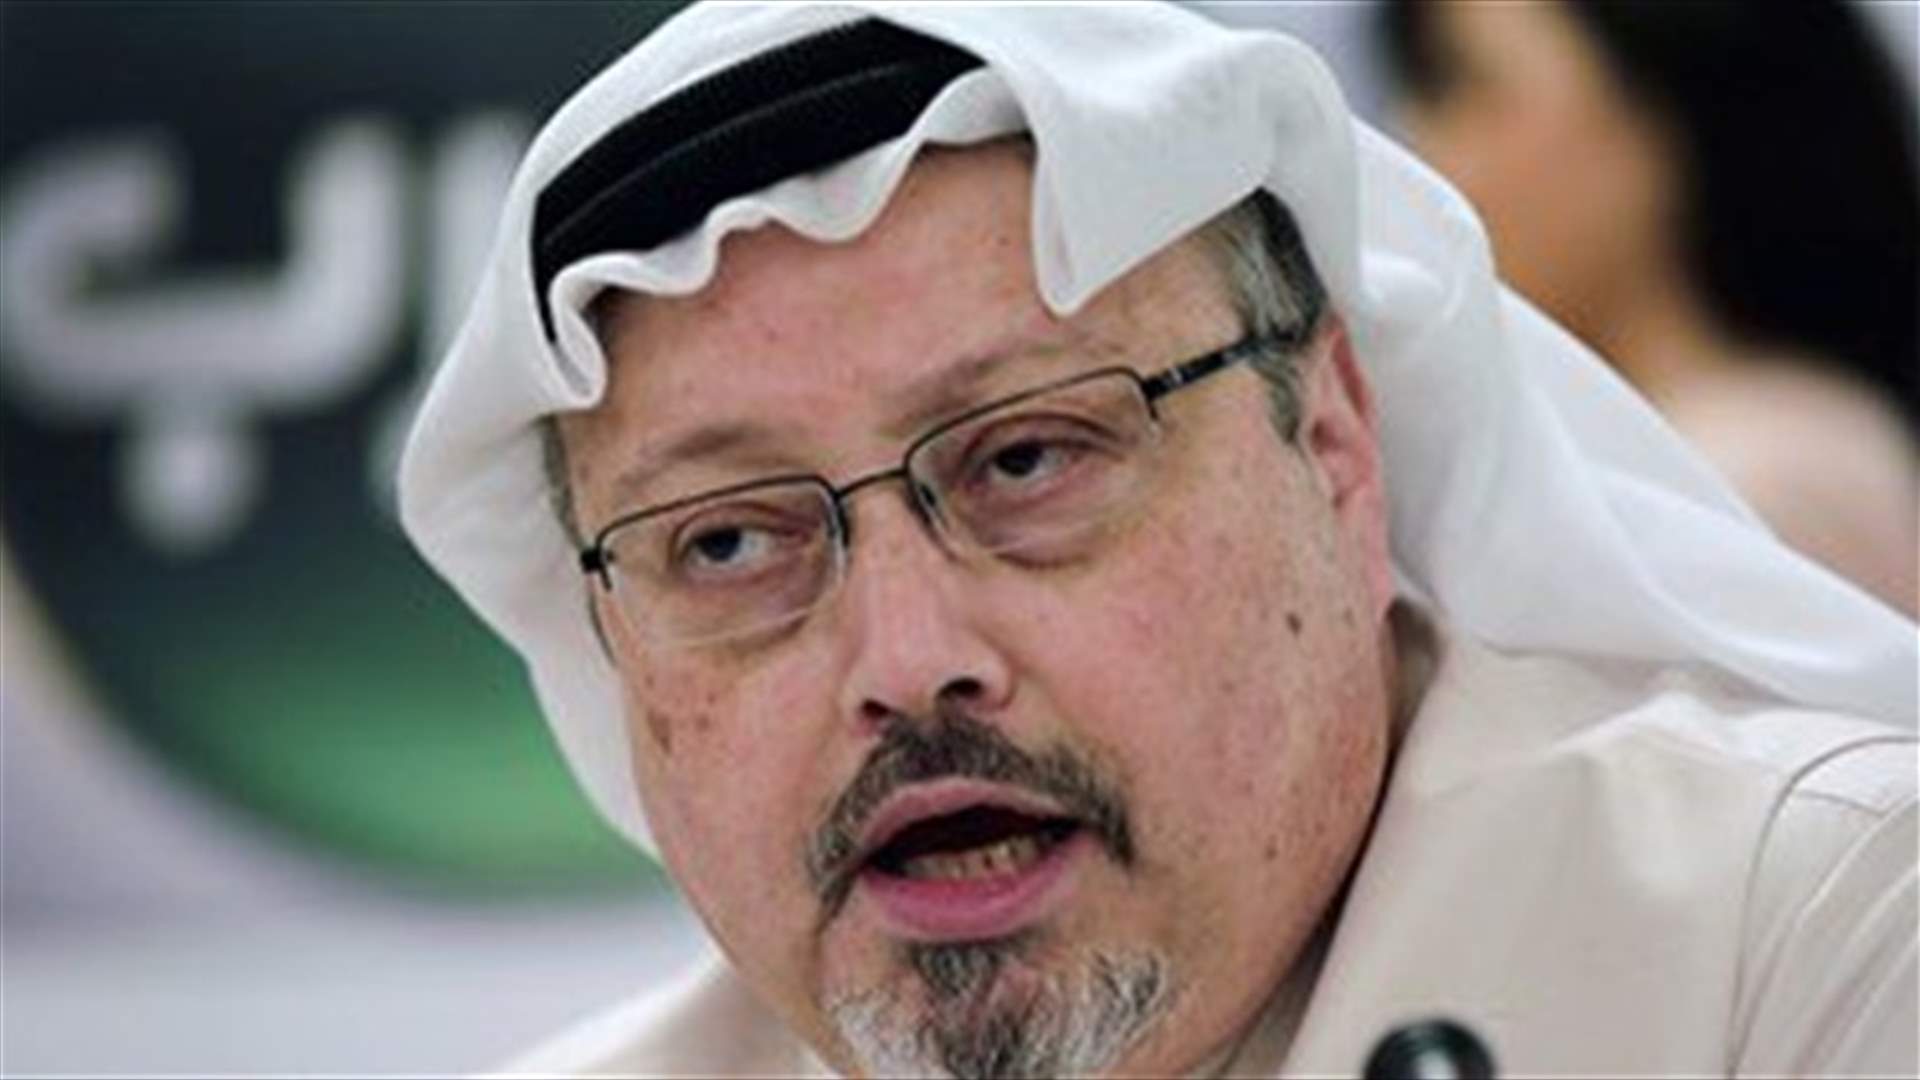 Evidence suggests Saudi Crown Prince is liable for Khashoggi murder - UN expert